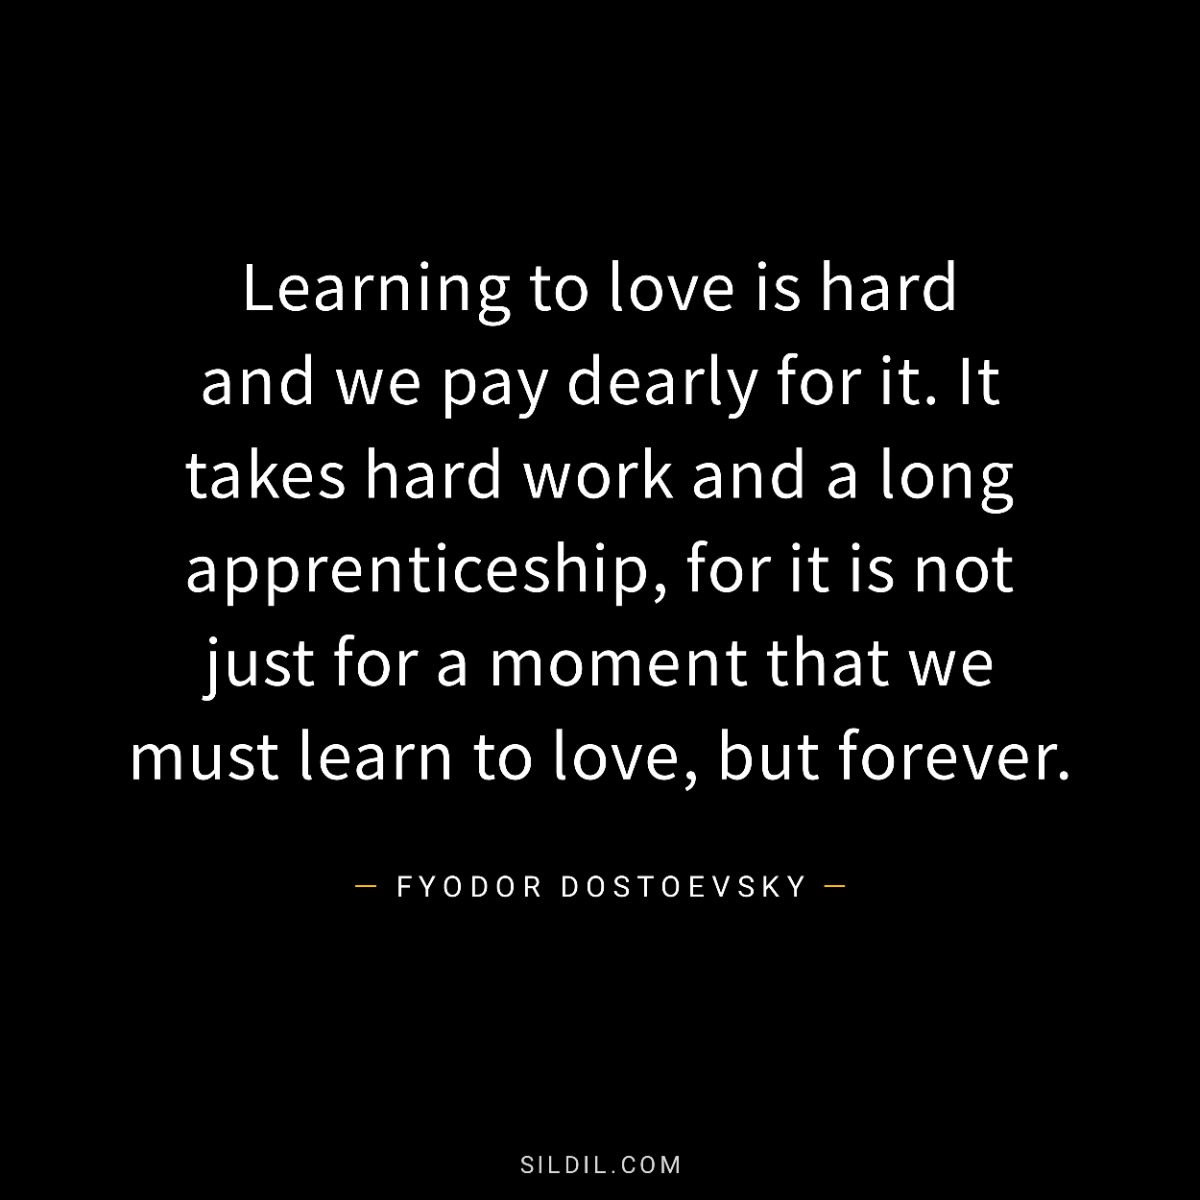 Learning to love is hard and we pay dearly for it. It takes hard work and a long apprenticeship, for it is not just for a moment that we must learn to love, but forever.